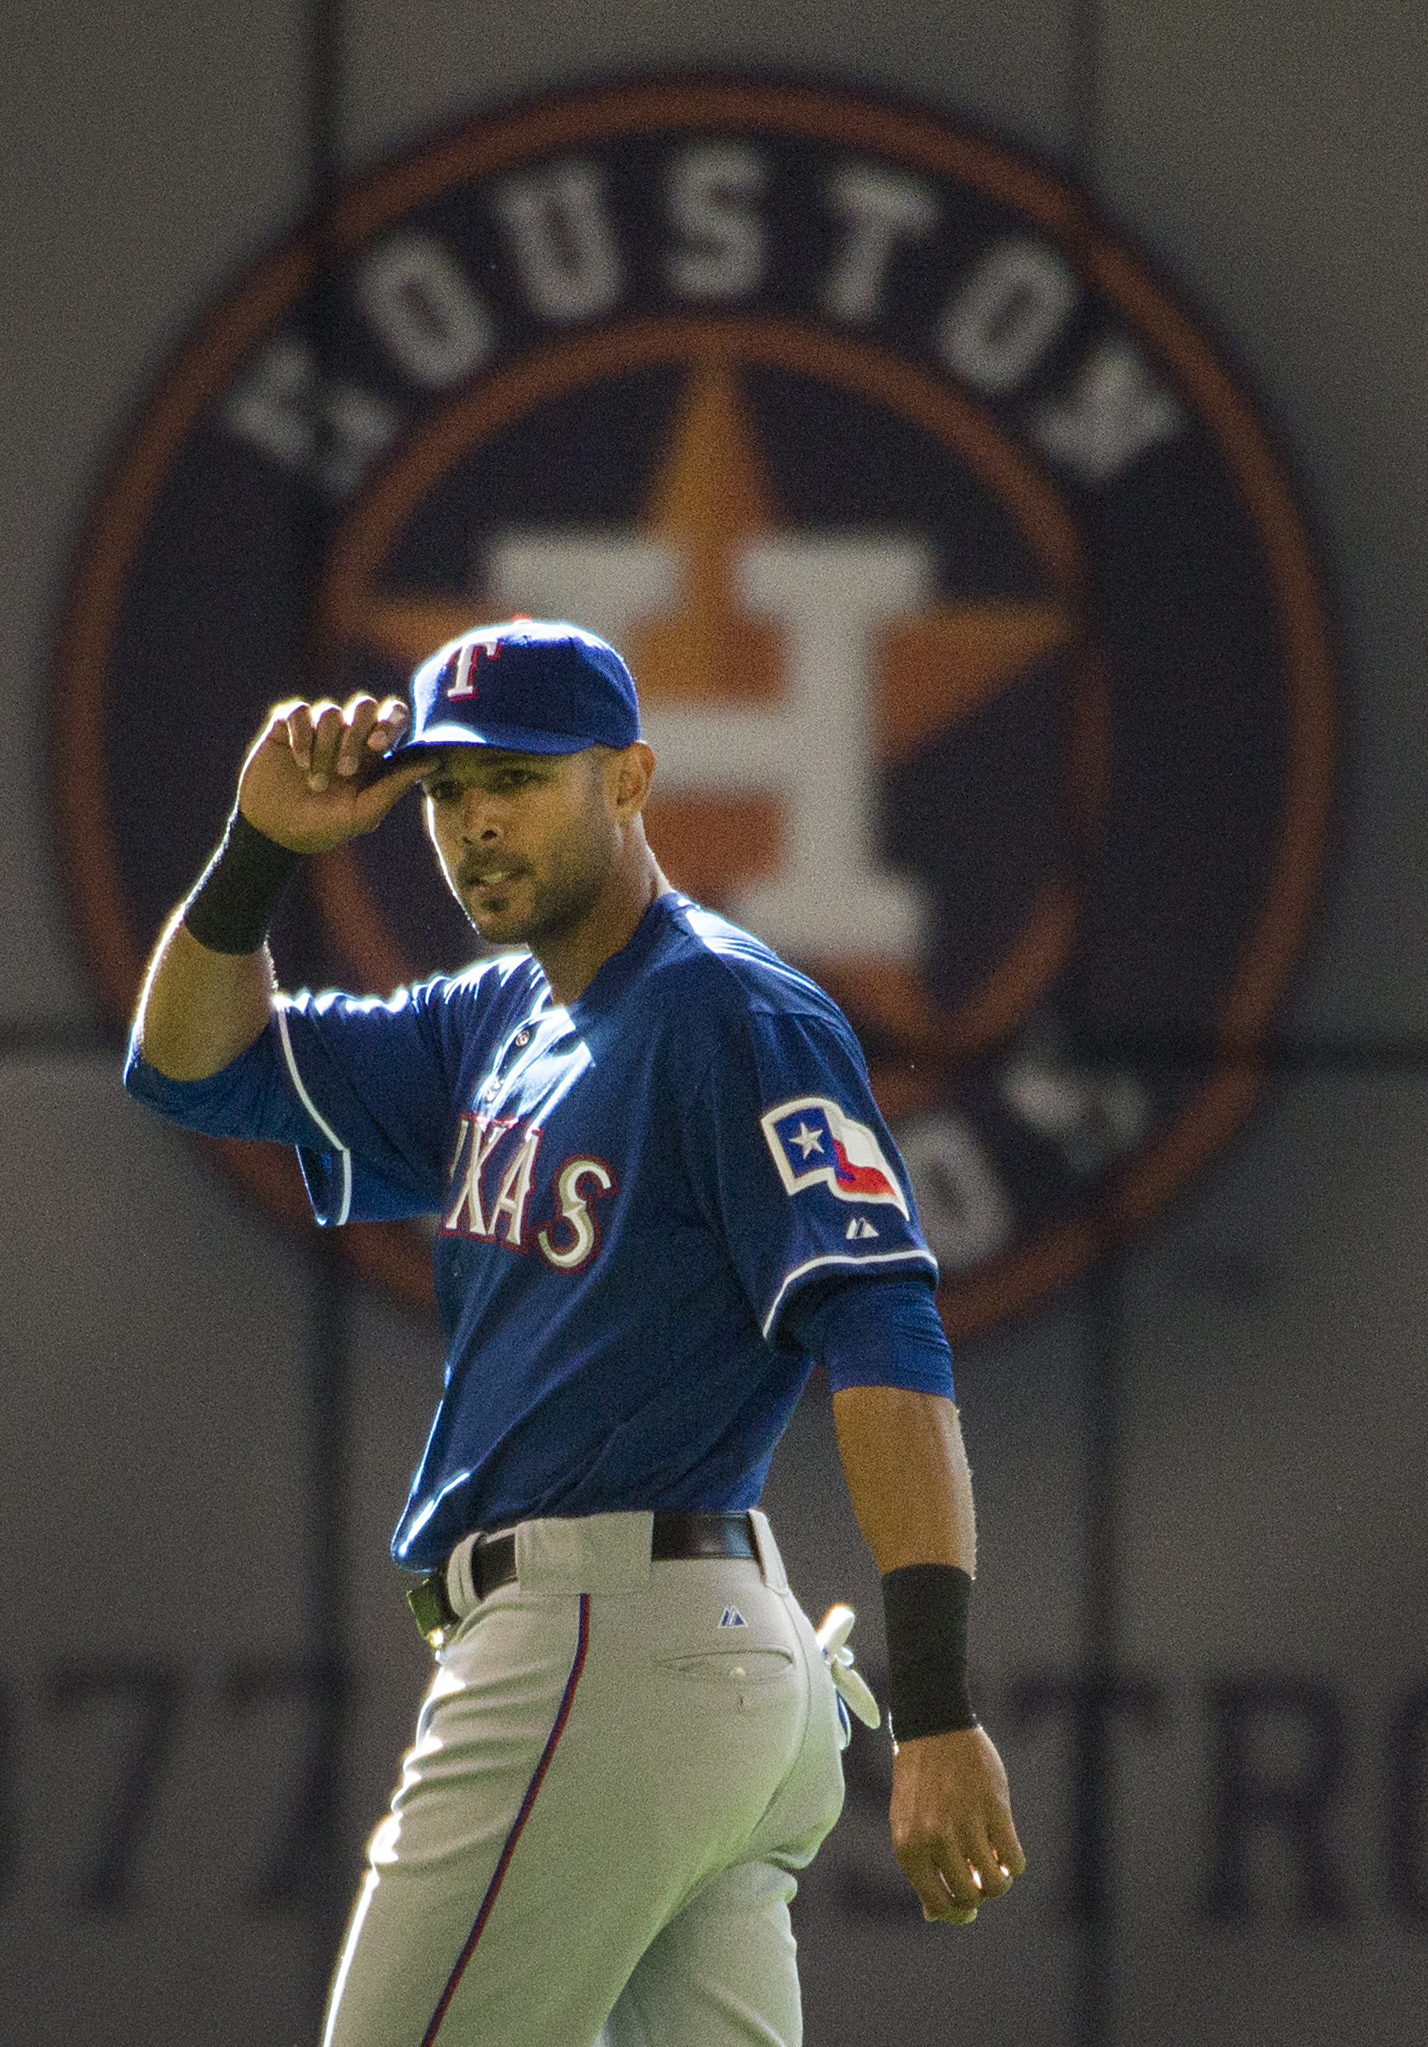 Rangers-Astros: A look at the rivalry, why fans hate each other